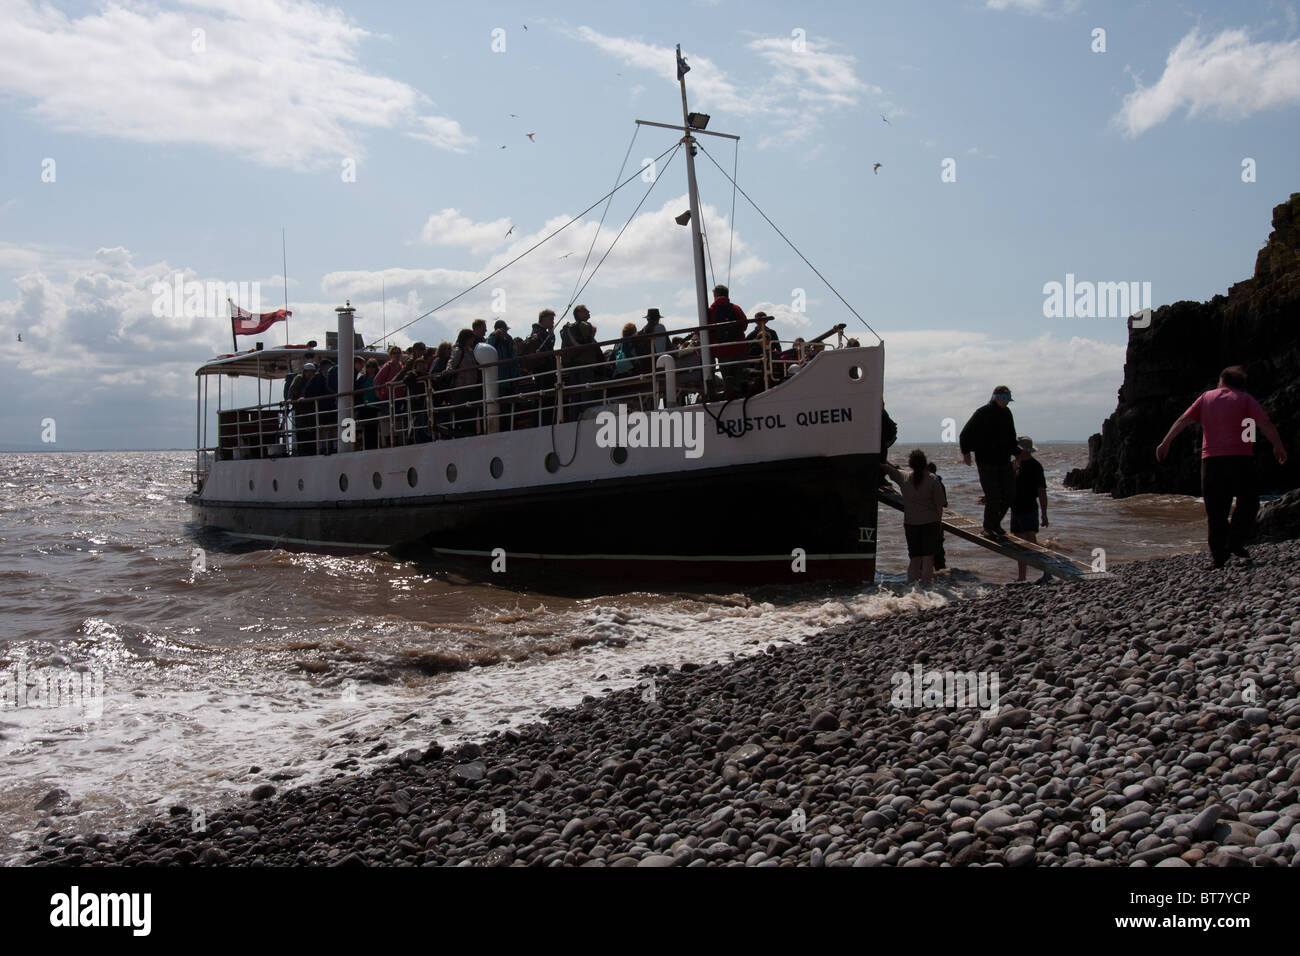 Bristol Queen arriving to drop off passengers at Steepholm Island,Bristol Channel. Stock Photo